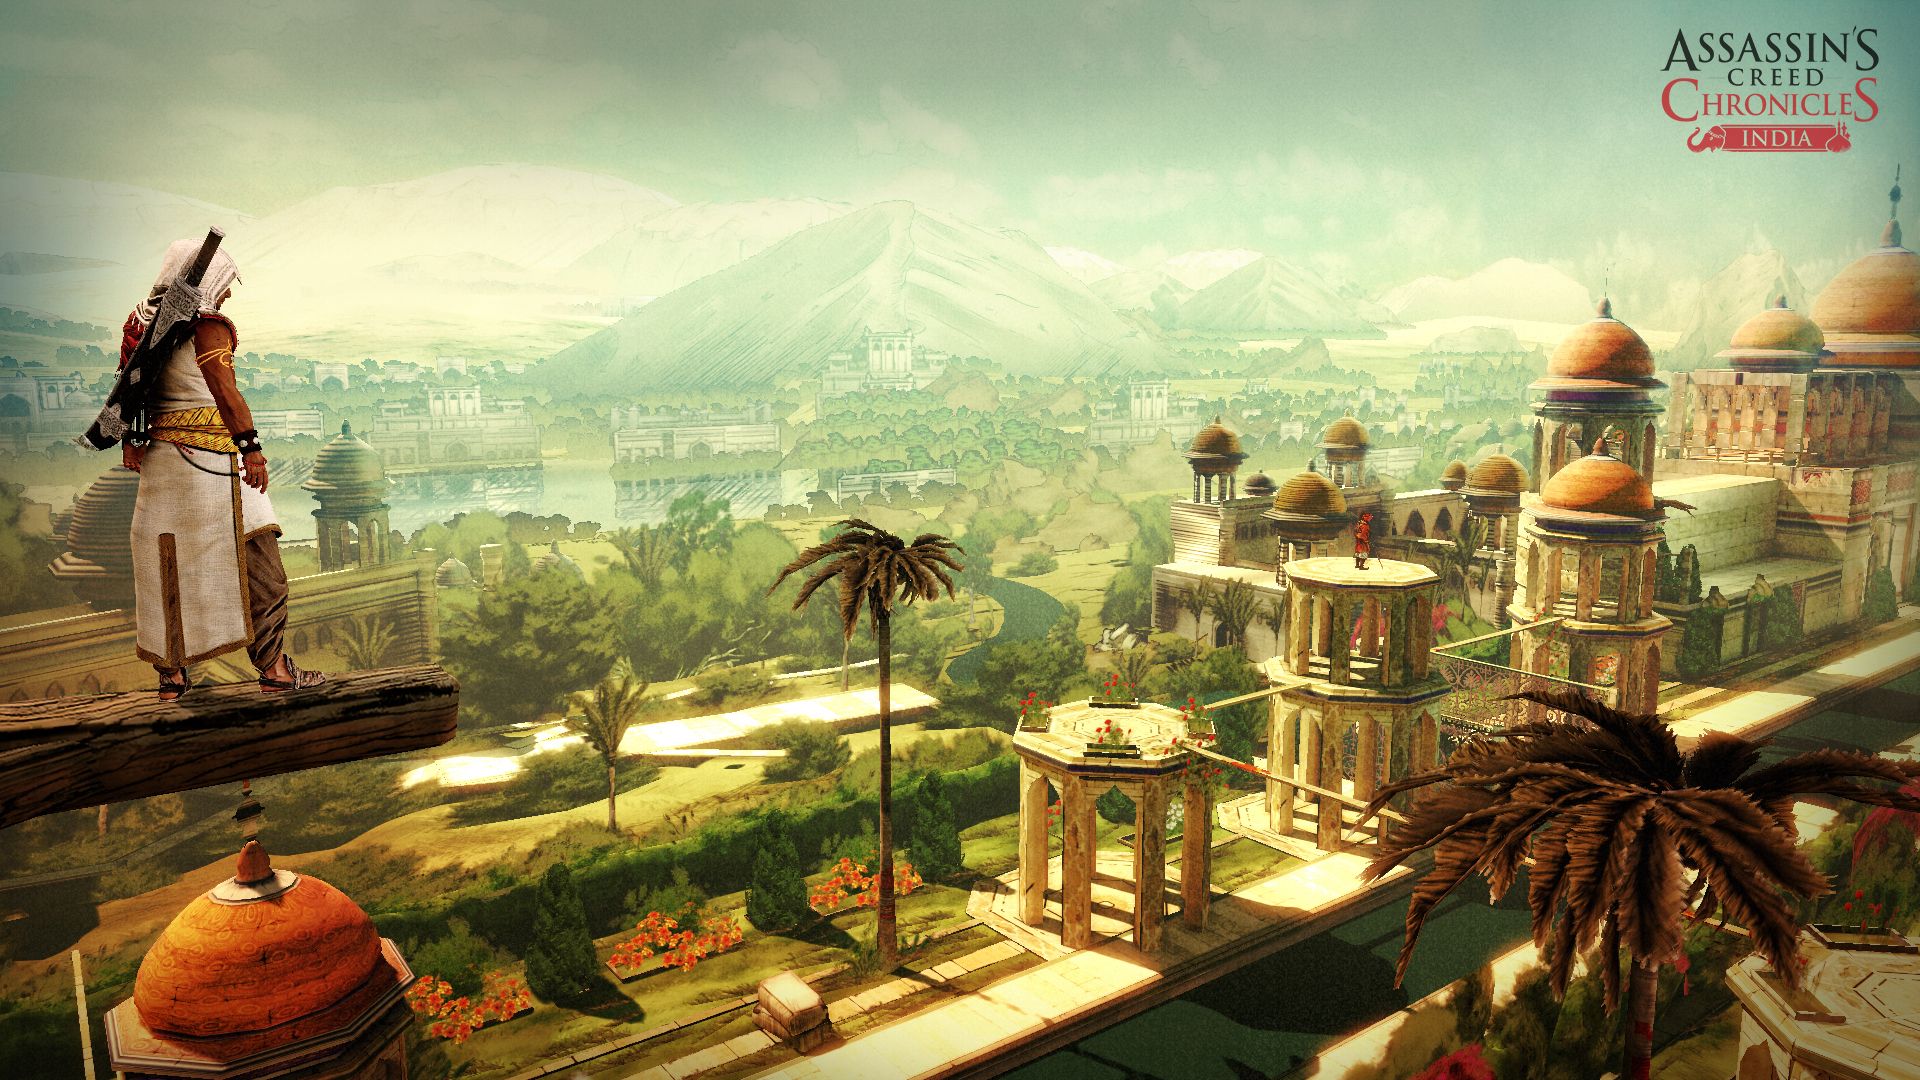 Assassin Creed Chronicles - India - 2